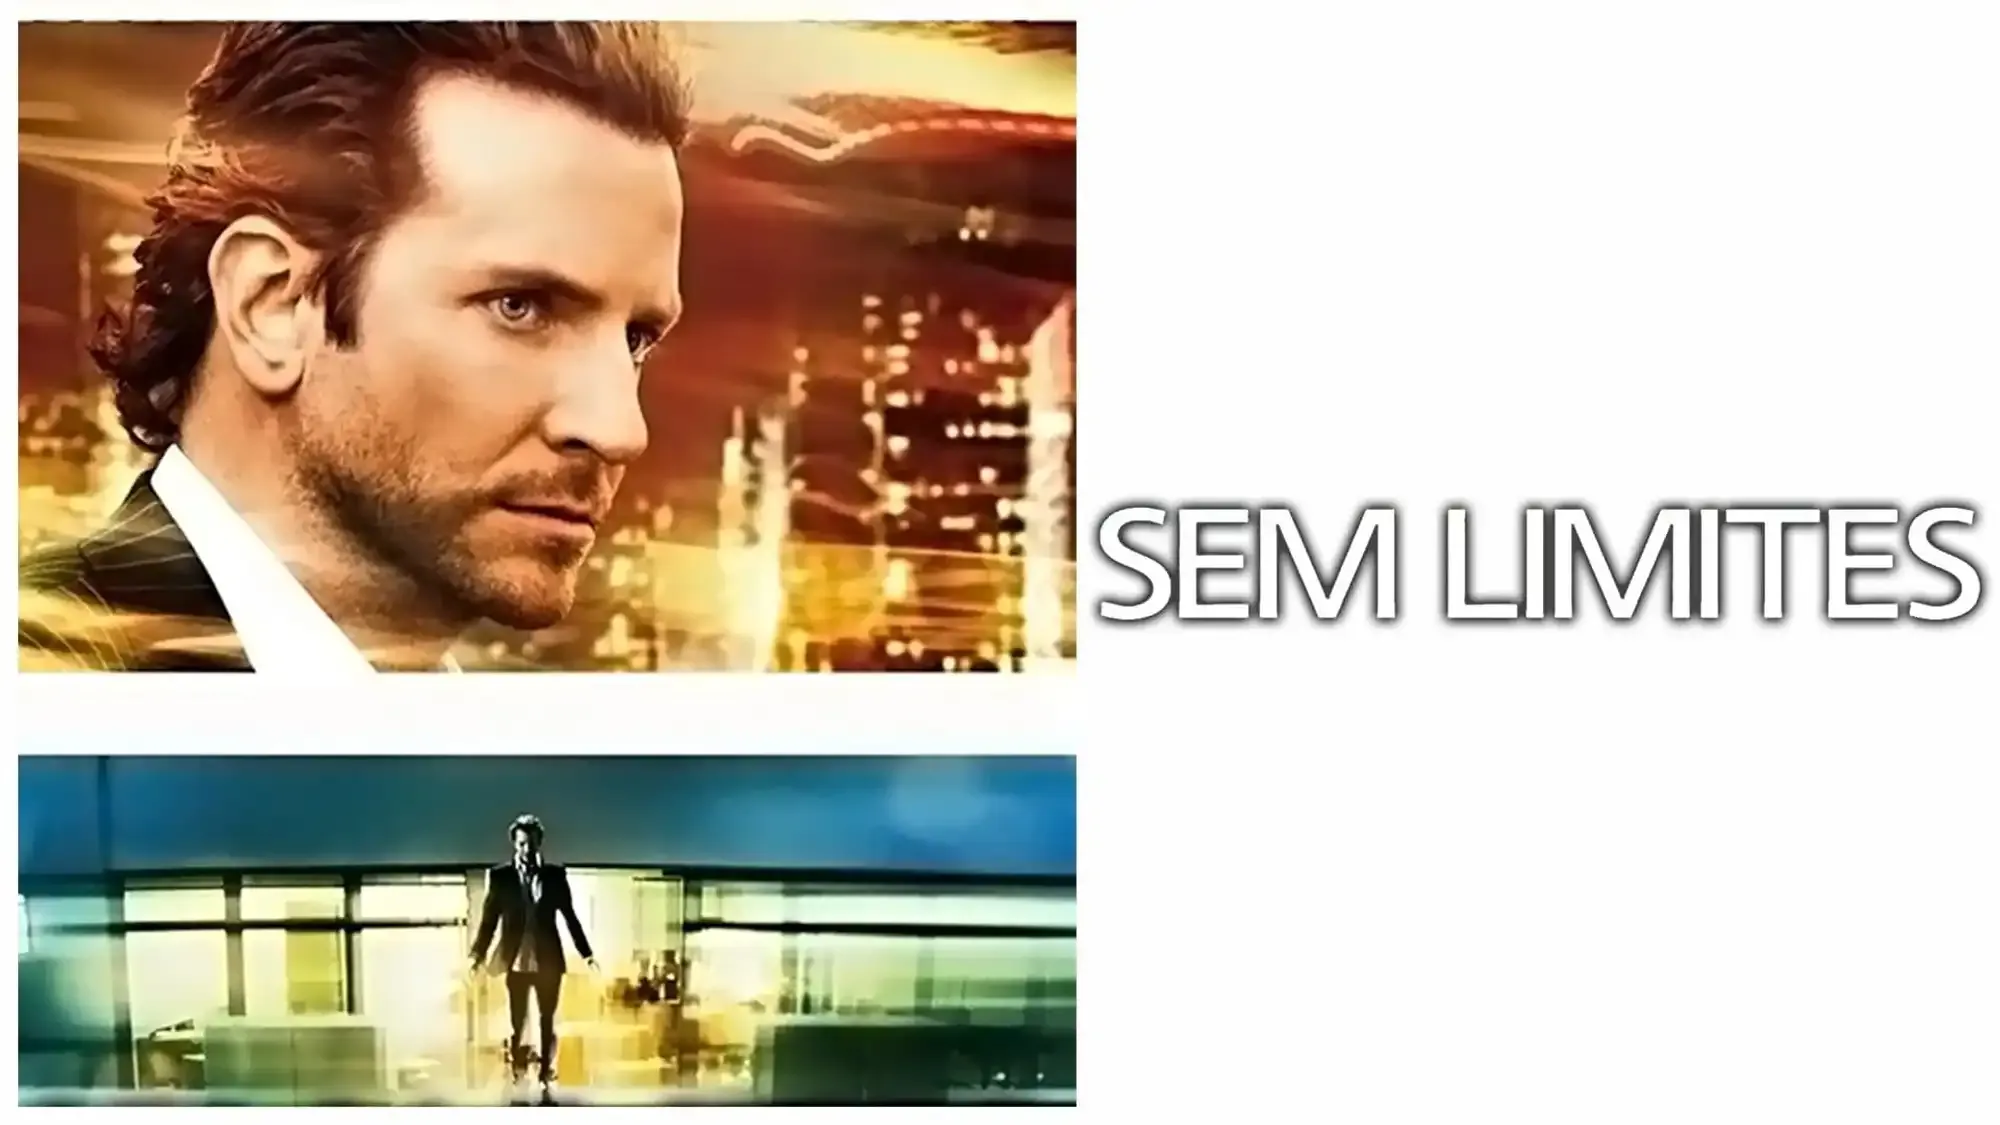 Limitless movie review